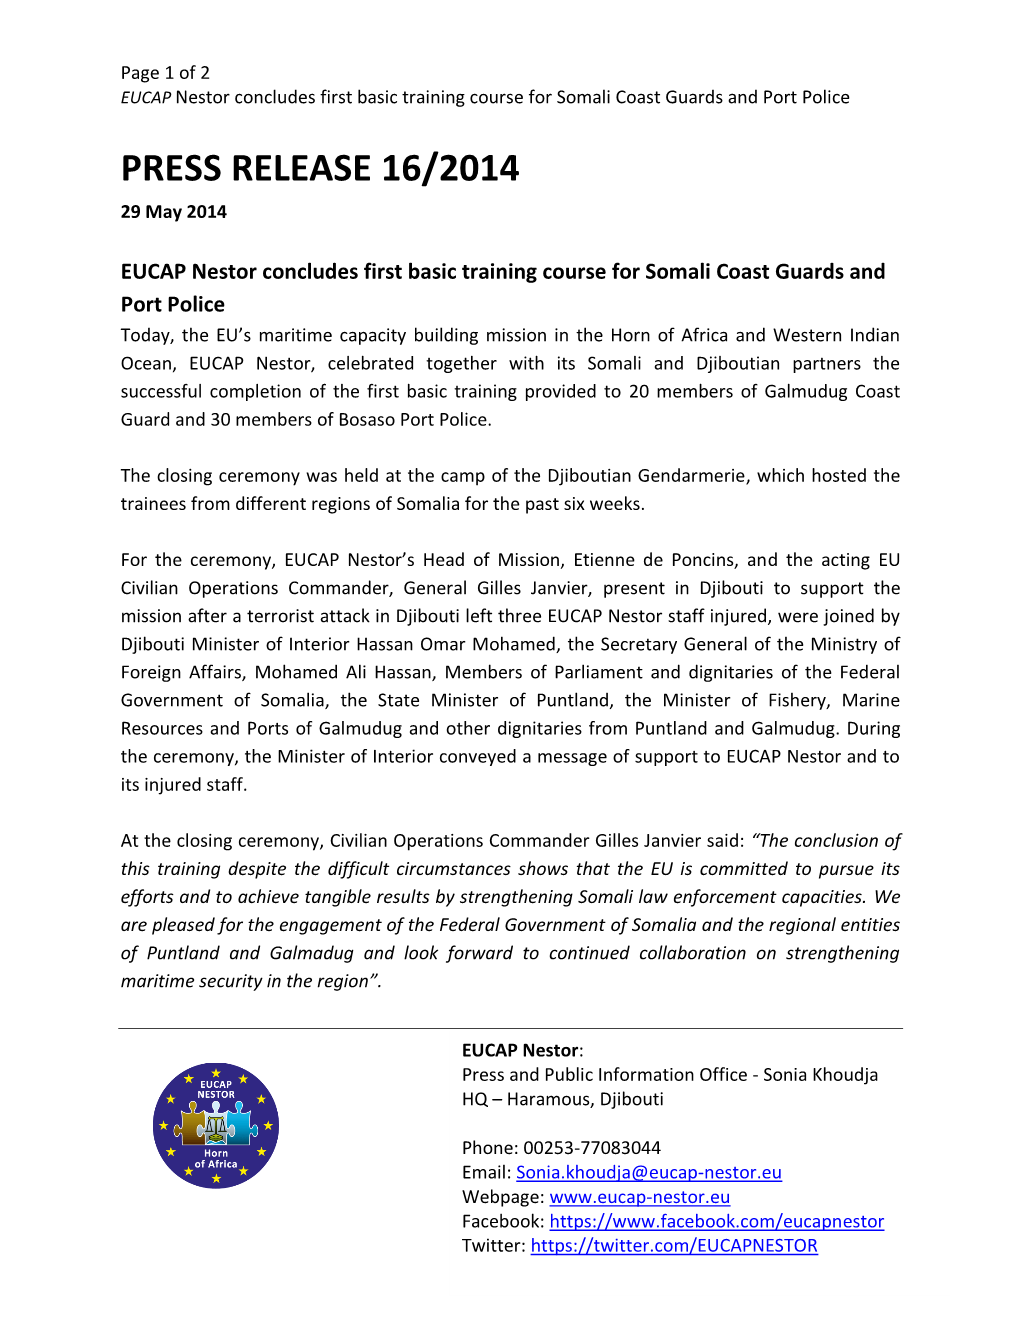 PRESS RELEASE 16/2014 29 May 2014